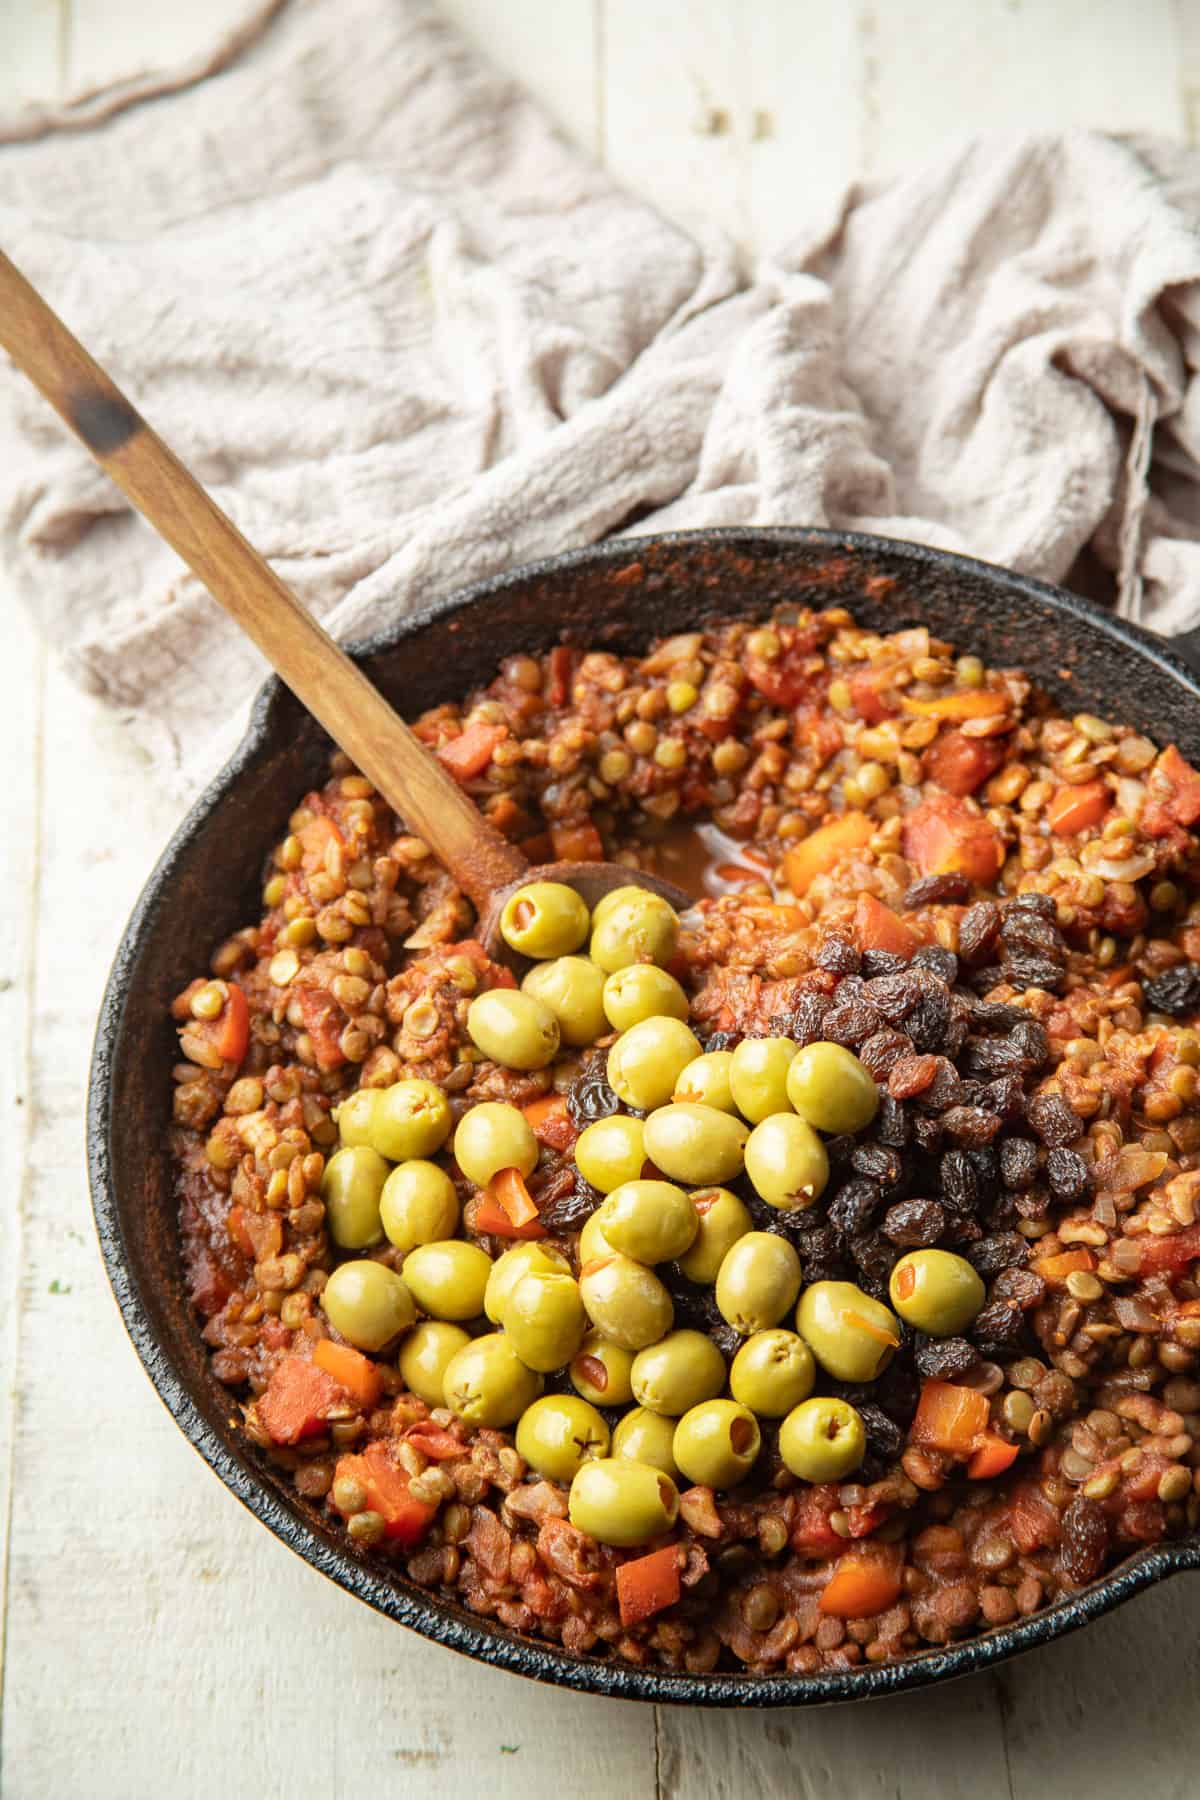 Skillet of Vegan Picadillo with olives and raisins on top.